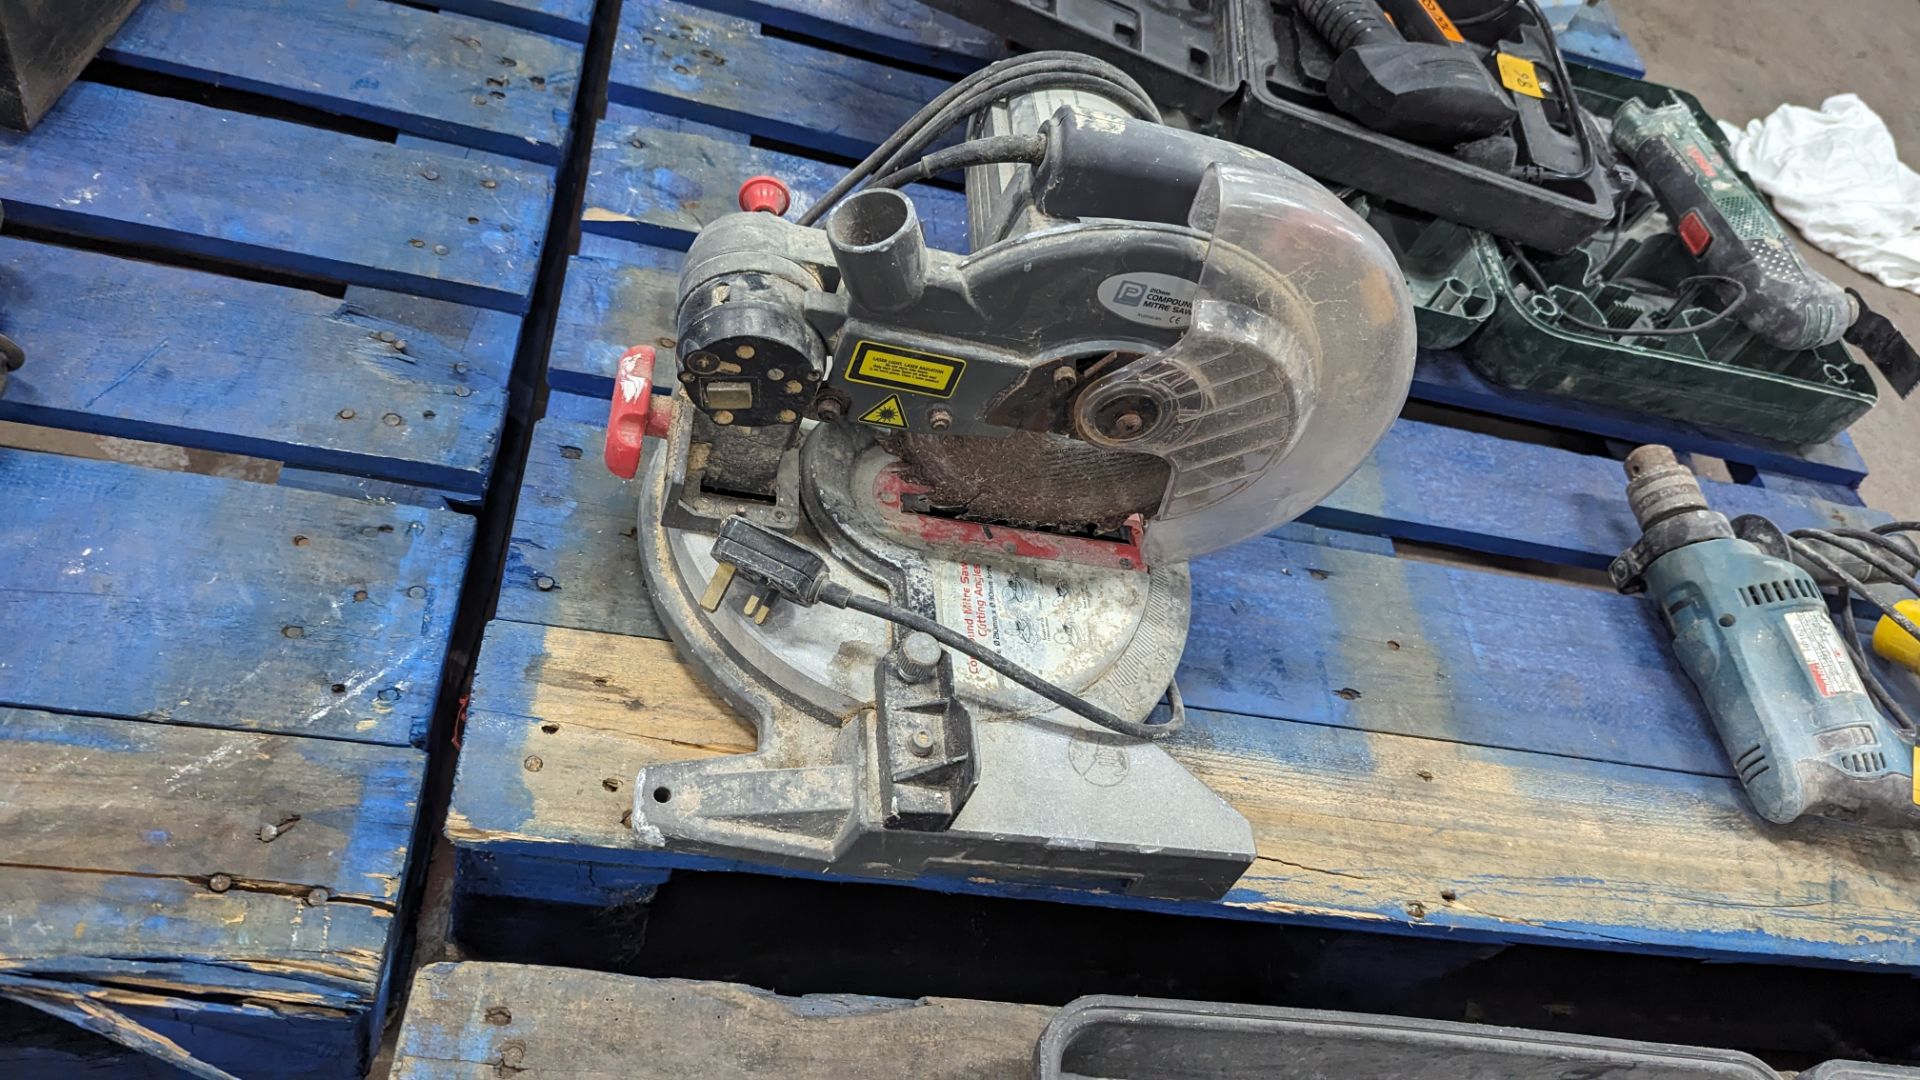 Performance Pro compound mitre saw model NLE210LMS, cutting angles - Image 8 of 8